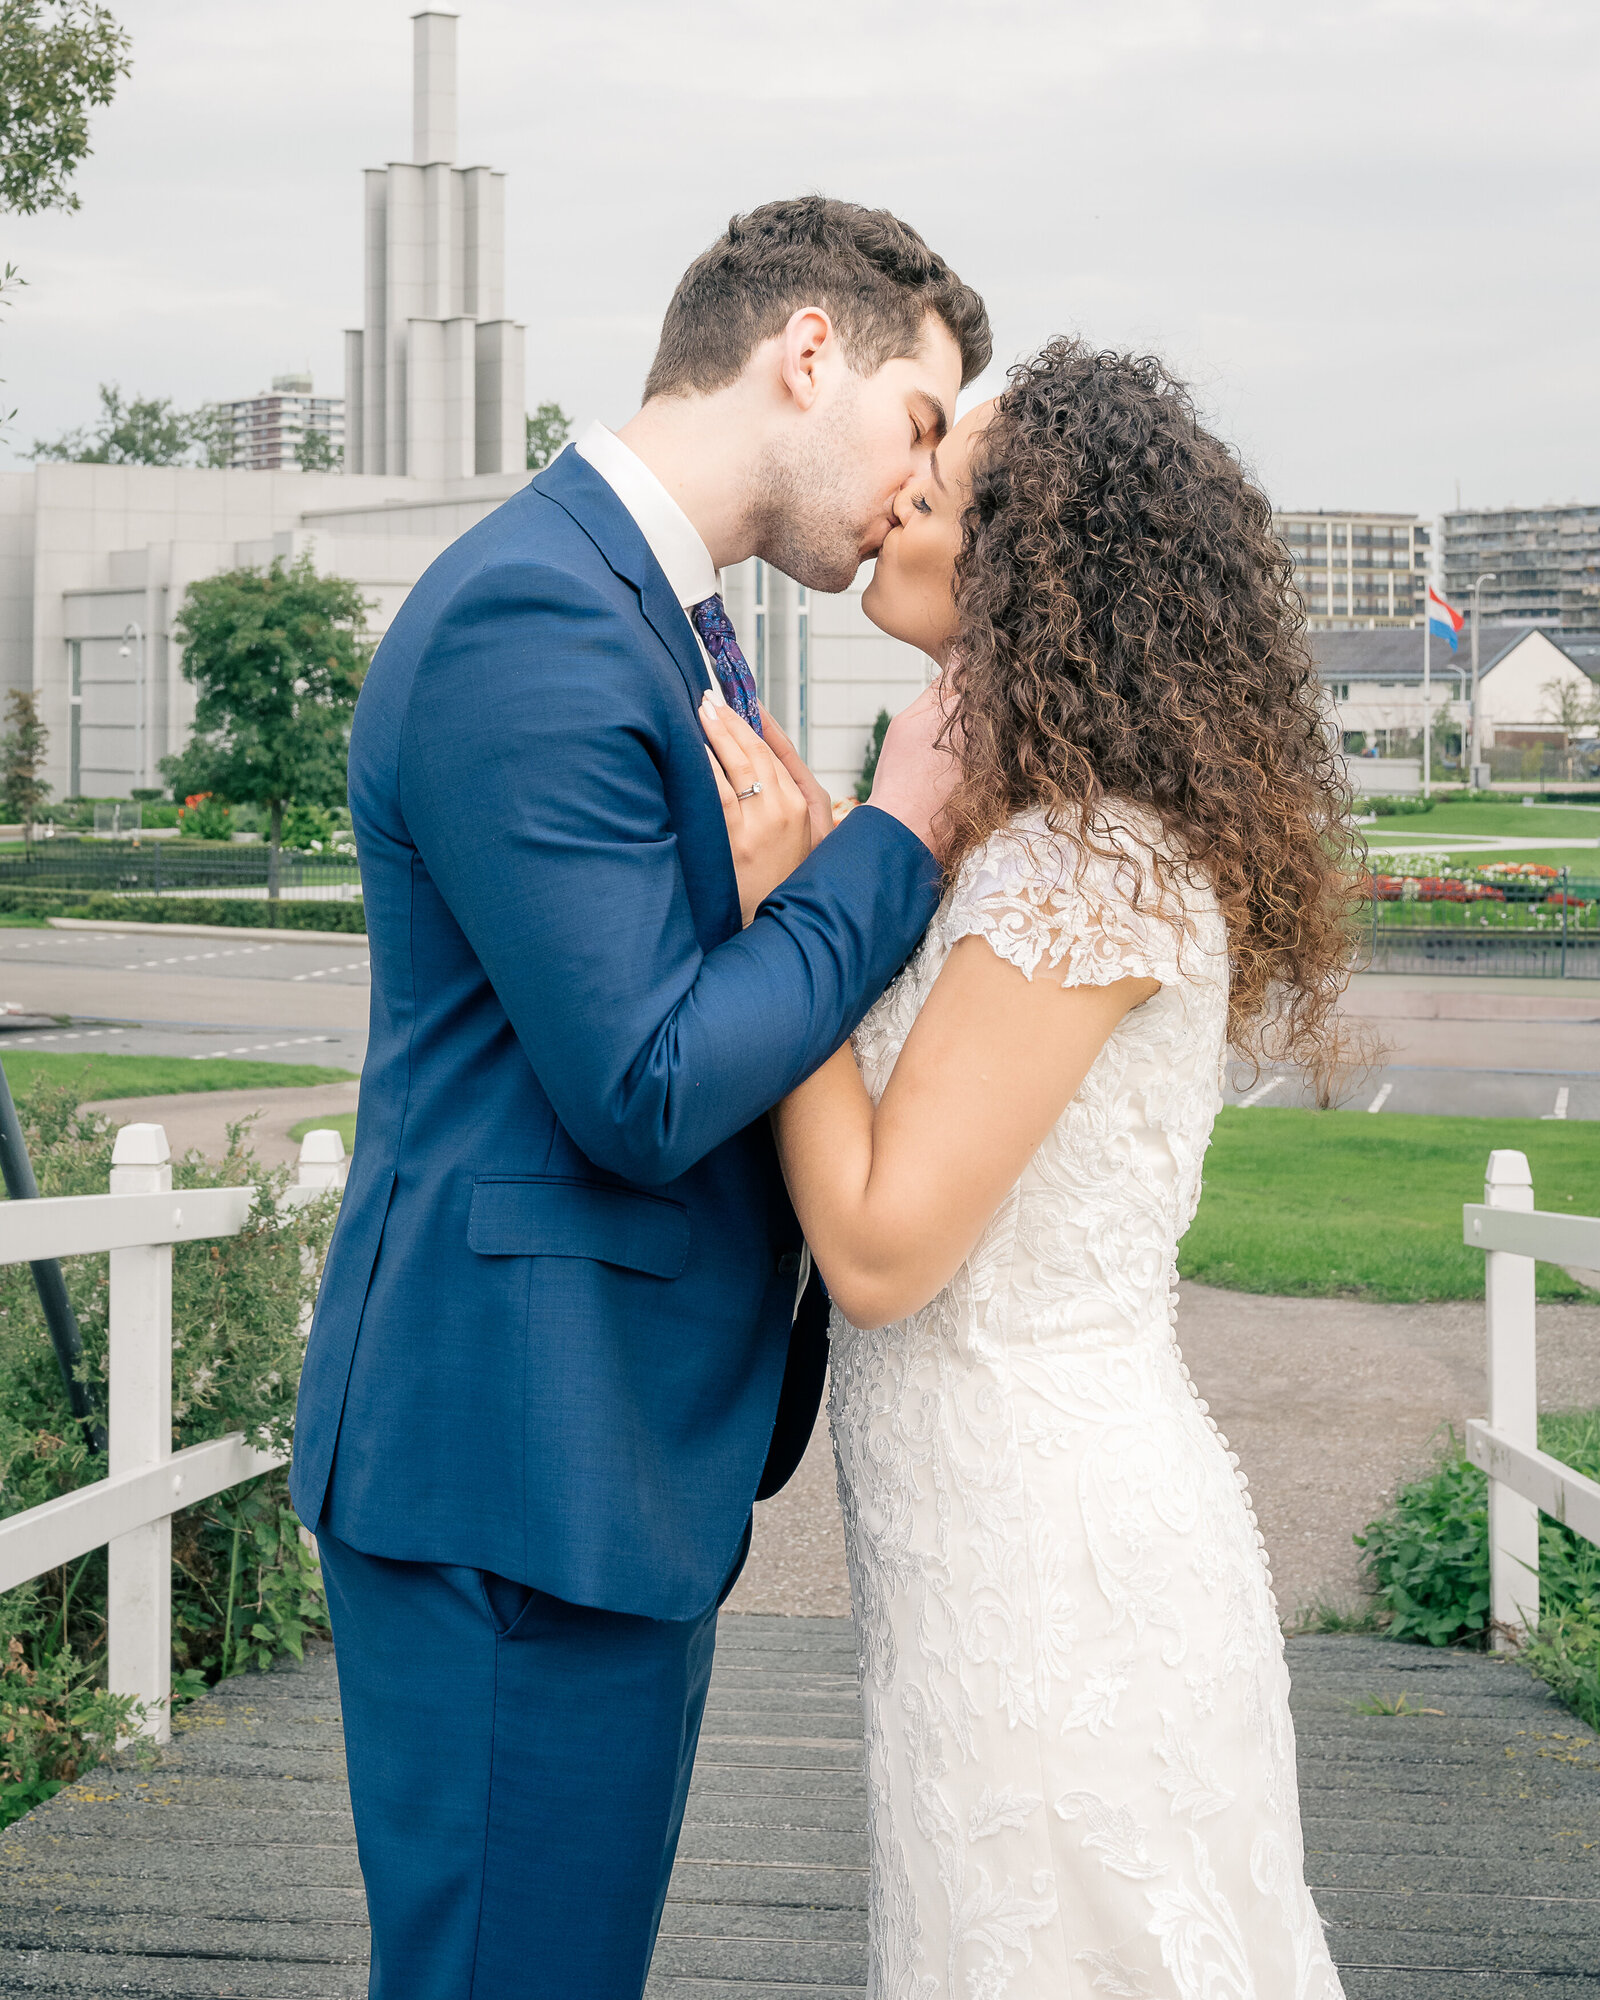 After the sealing in the Church of Jesus Christ temple in the Hague, bride Naomi and groom John share a kiss on the traditional Dutch bridge nearby